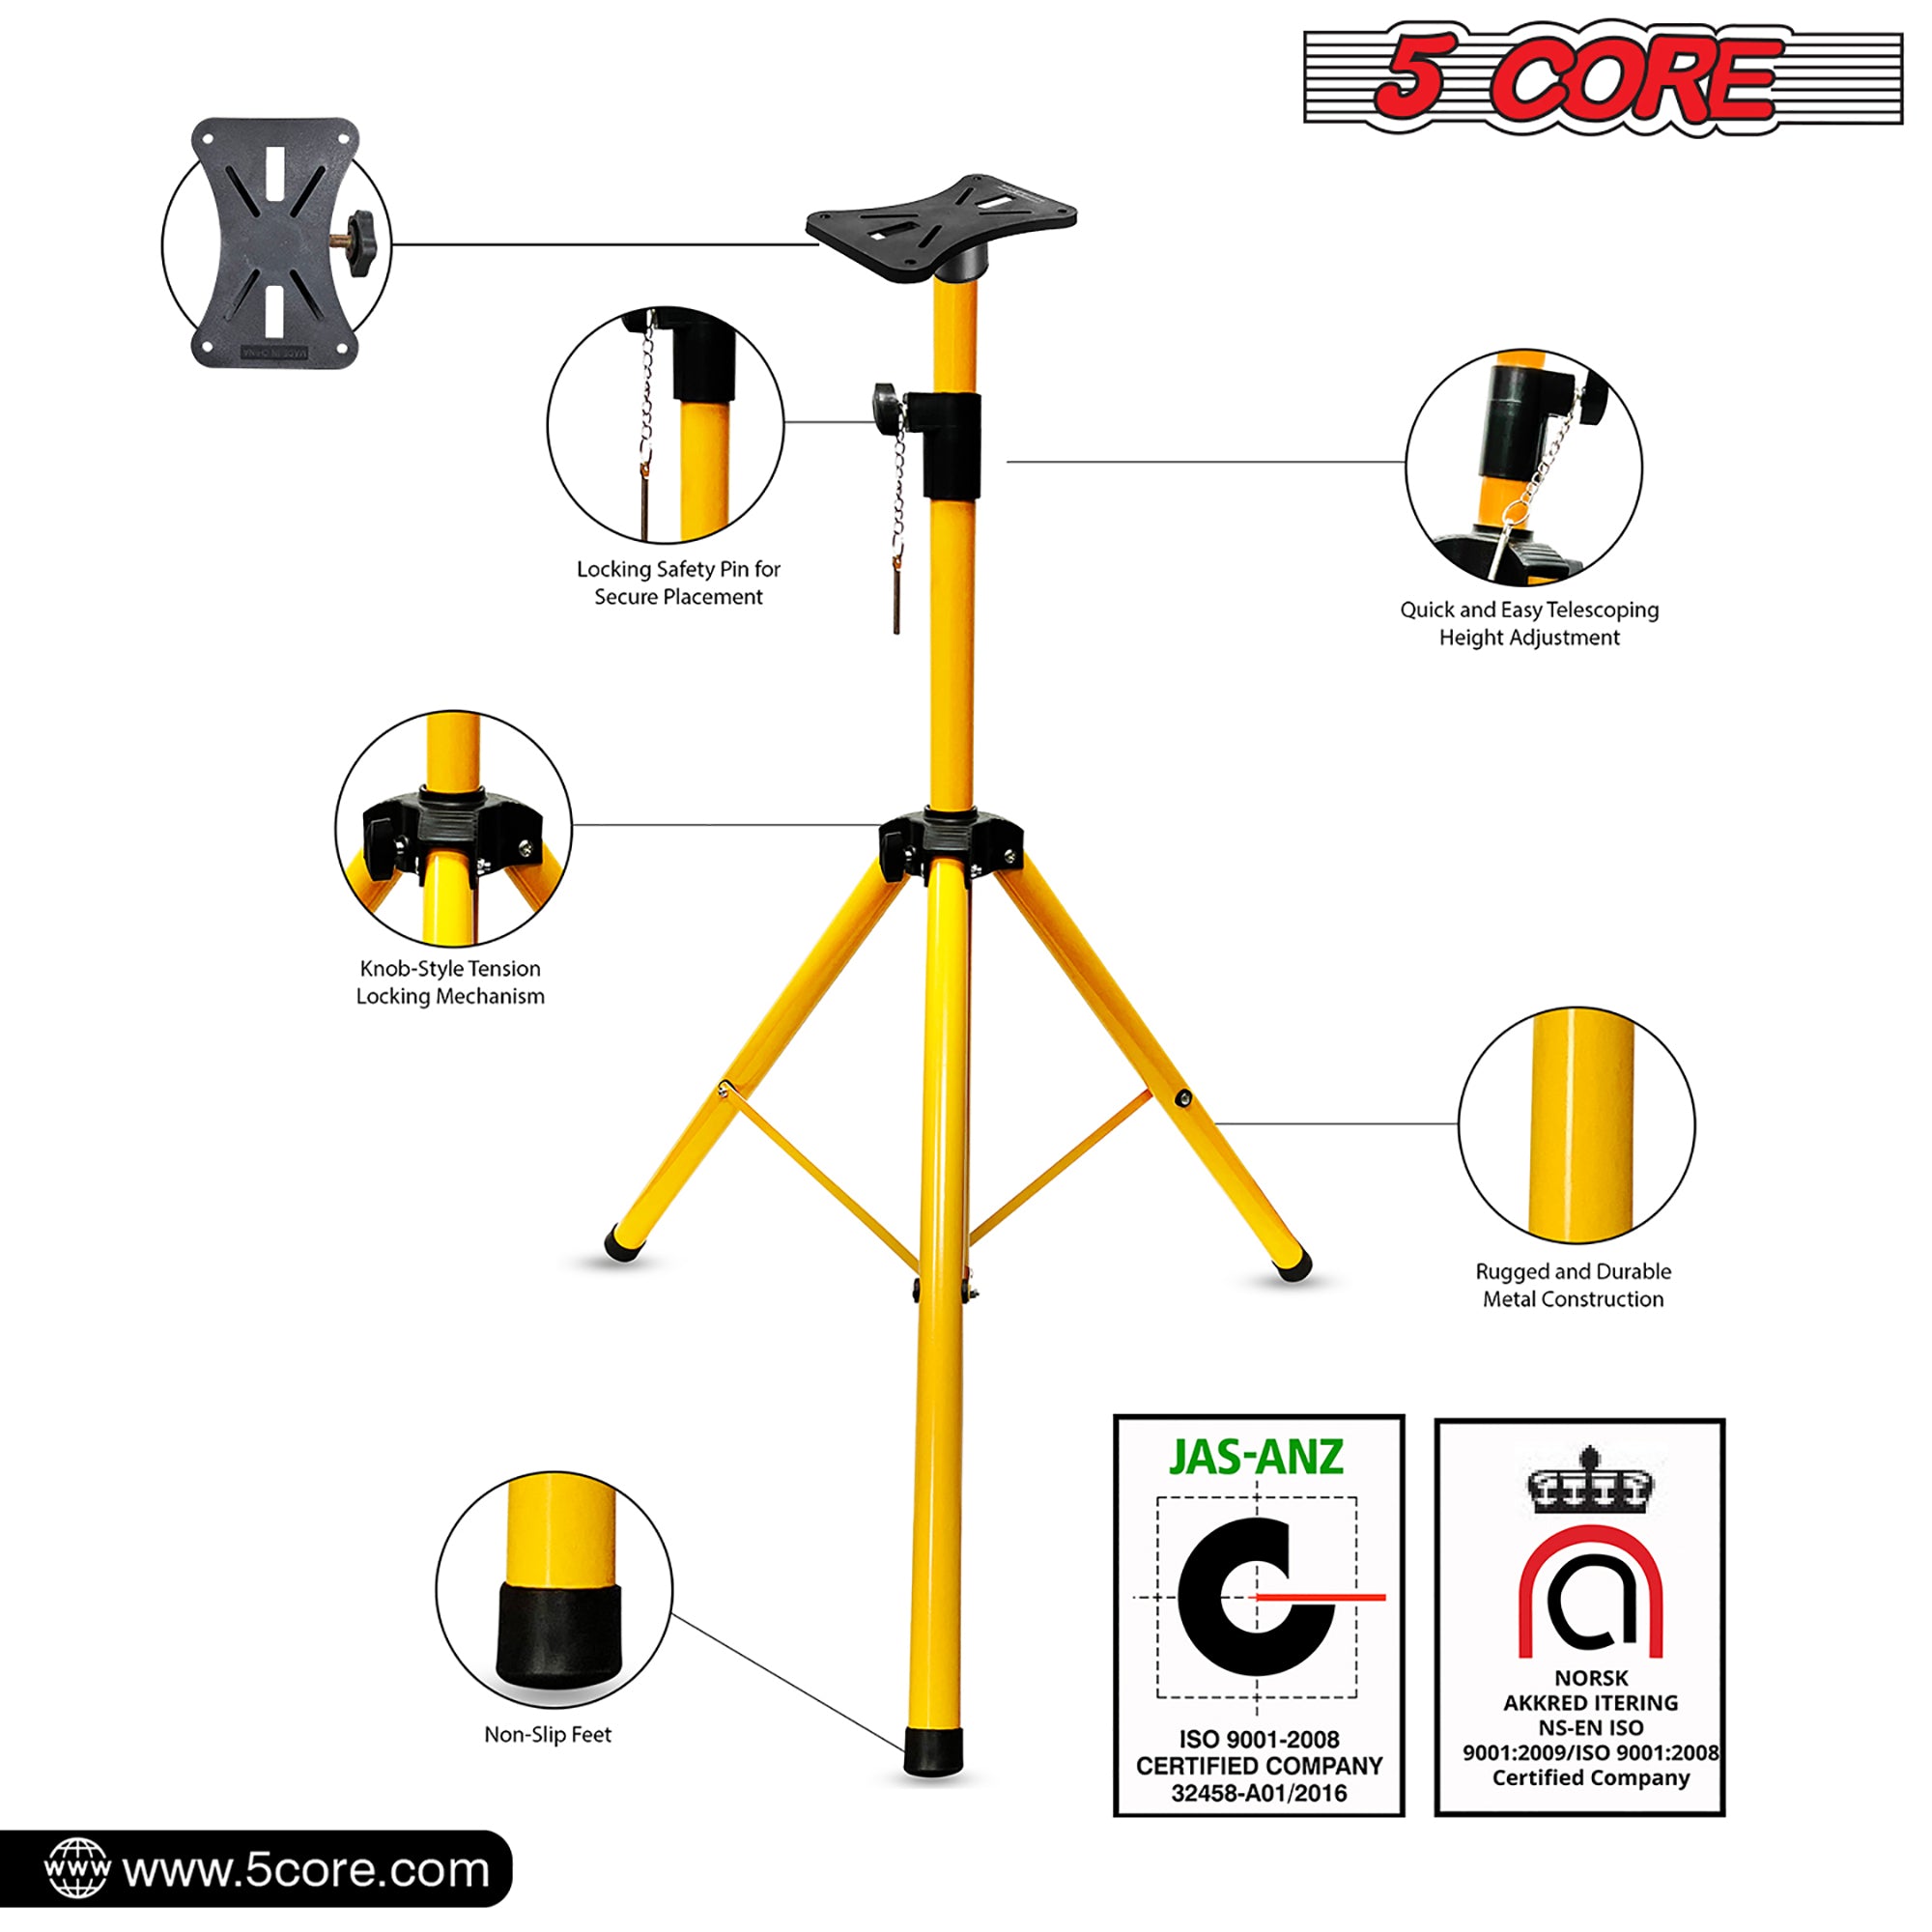 5 Core speaker Stand 2 Pieces Subwoofer Stands Yellow Height Adjustable Light Weight Studio PA Speaker Holder for Large Speakers w Locking Safety PIN and 35mm Compatible Insert On Stage In Studio Use - SS ECO 2PK YLW WoB